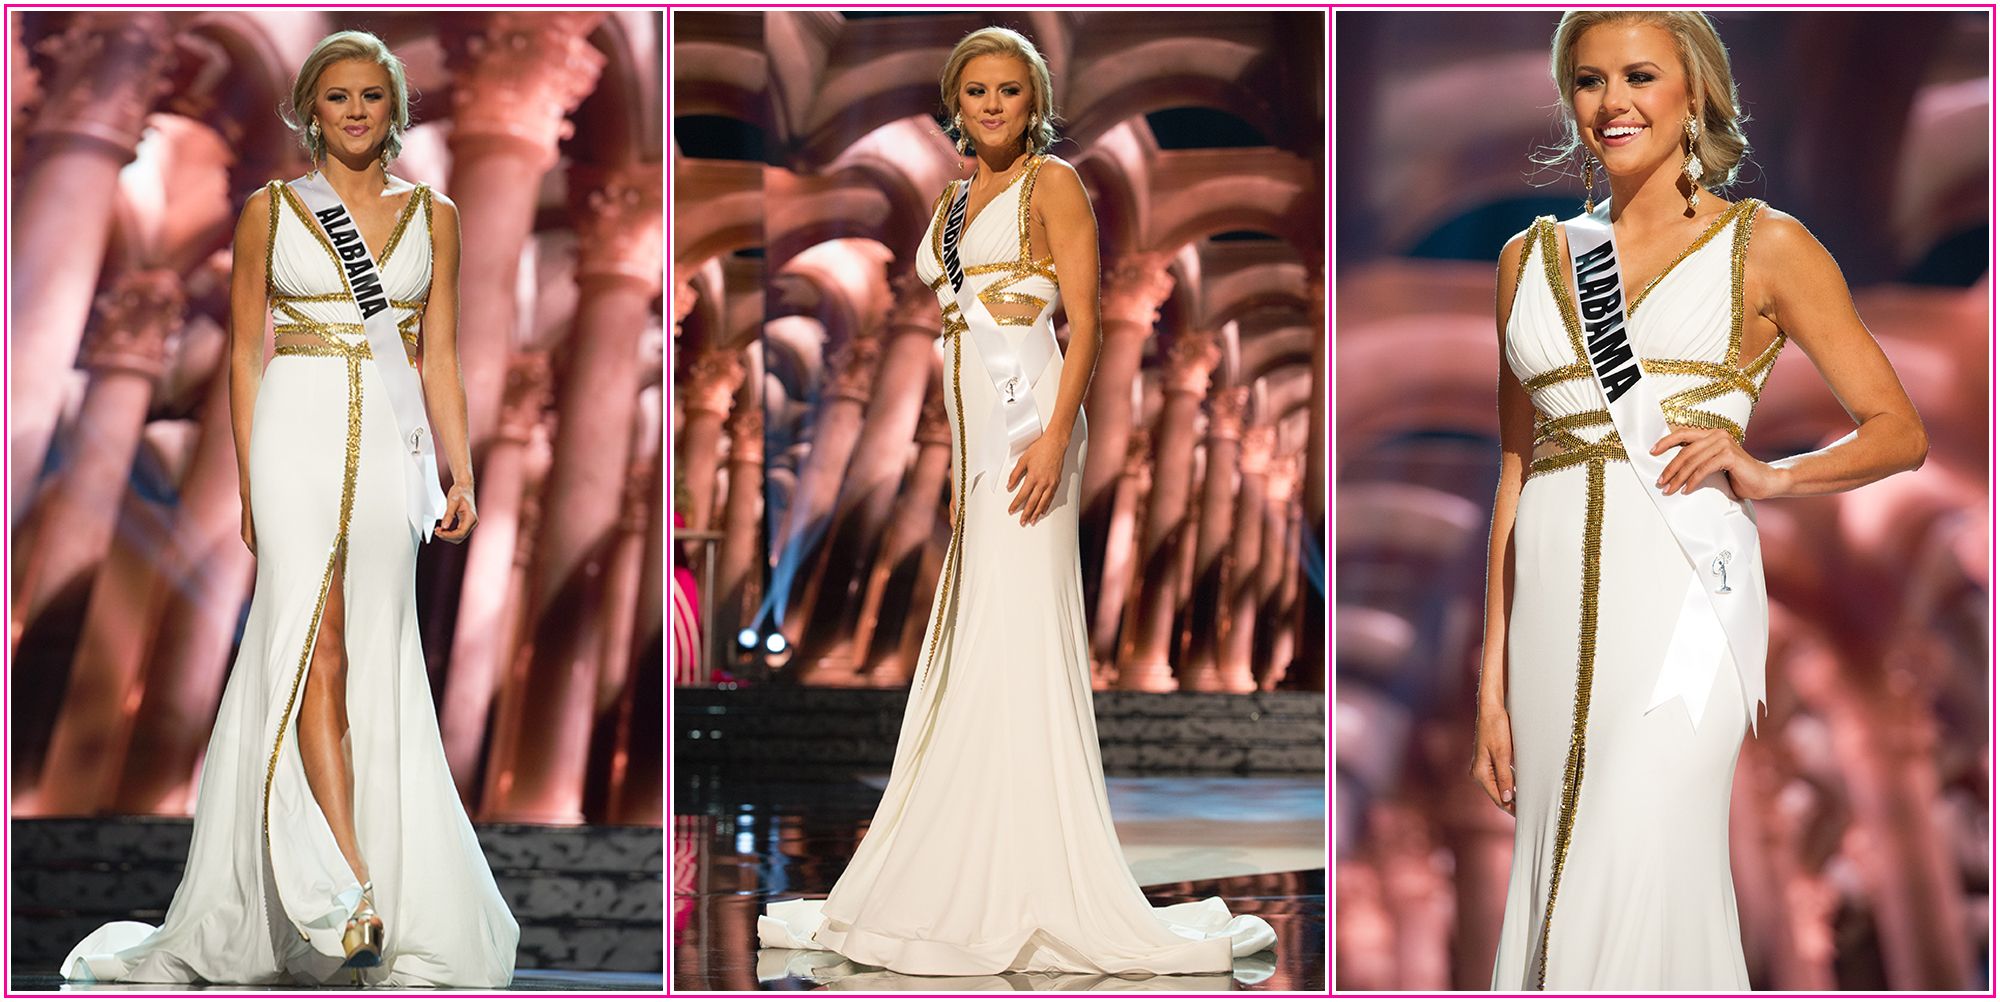 The Most Beautiful Evening Gowns At Miss Universe 2016